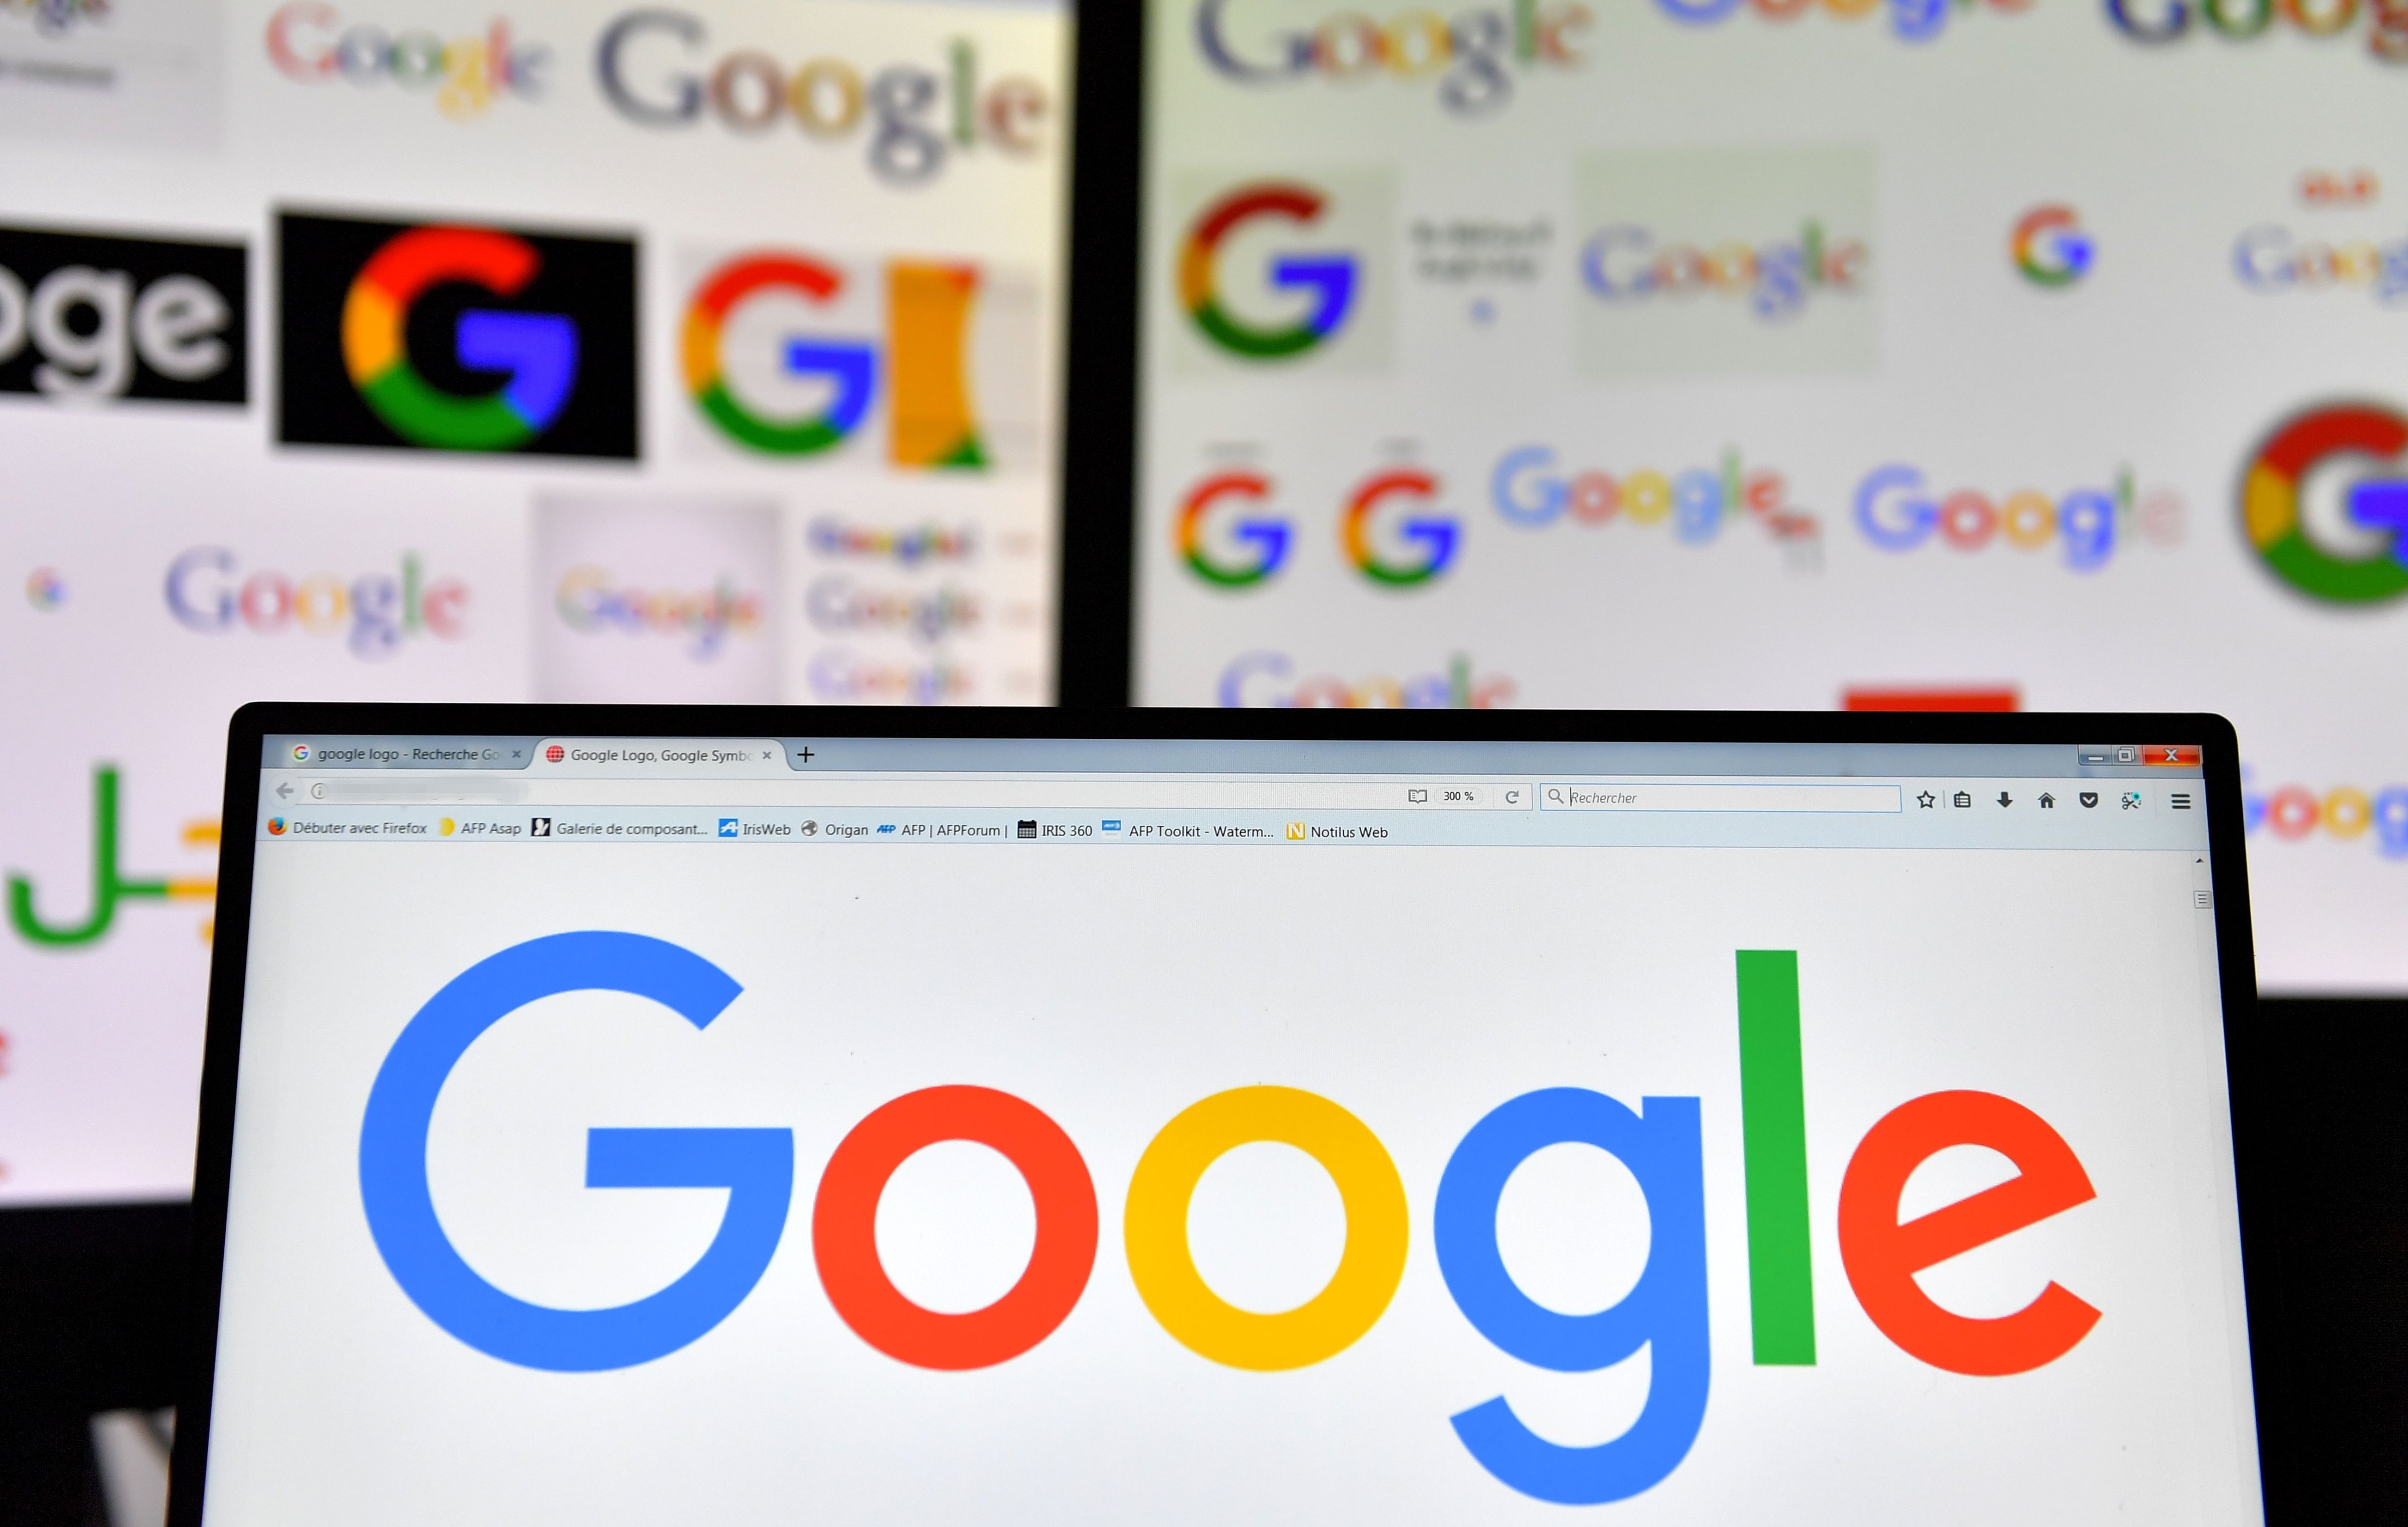 Google's logo is seen displayed on computer screens. (Loic Venance&mdash;AFP/Getty Images)